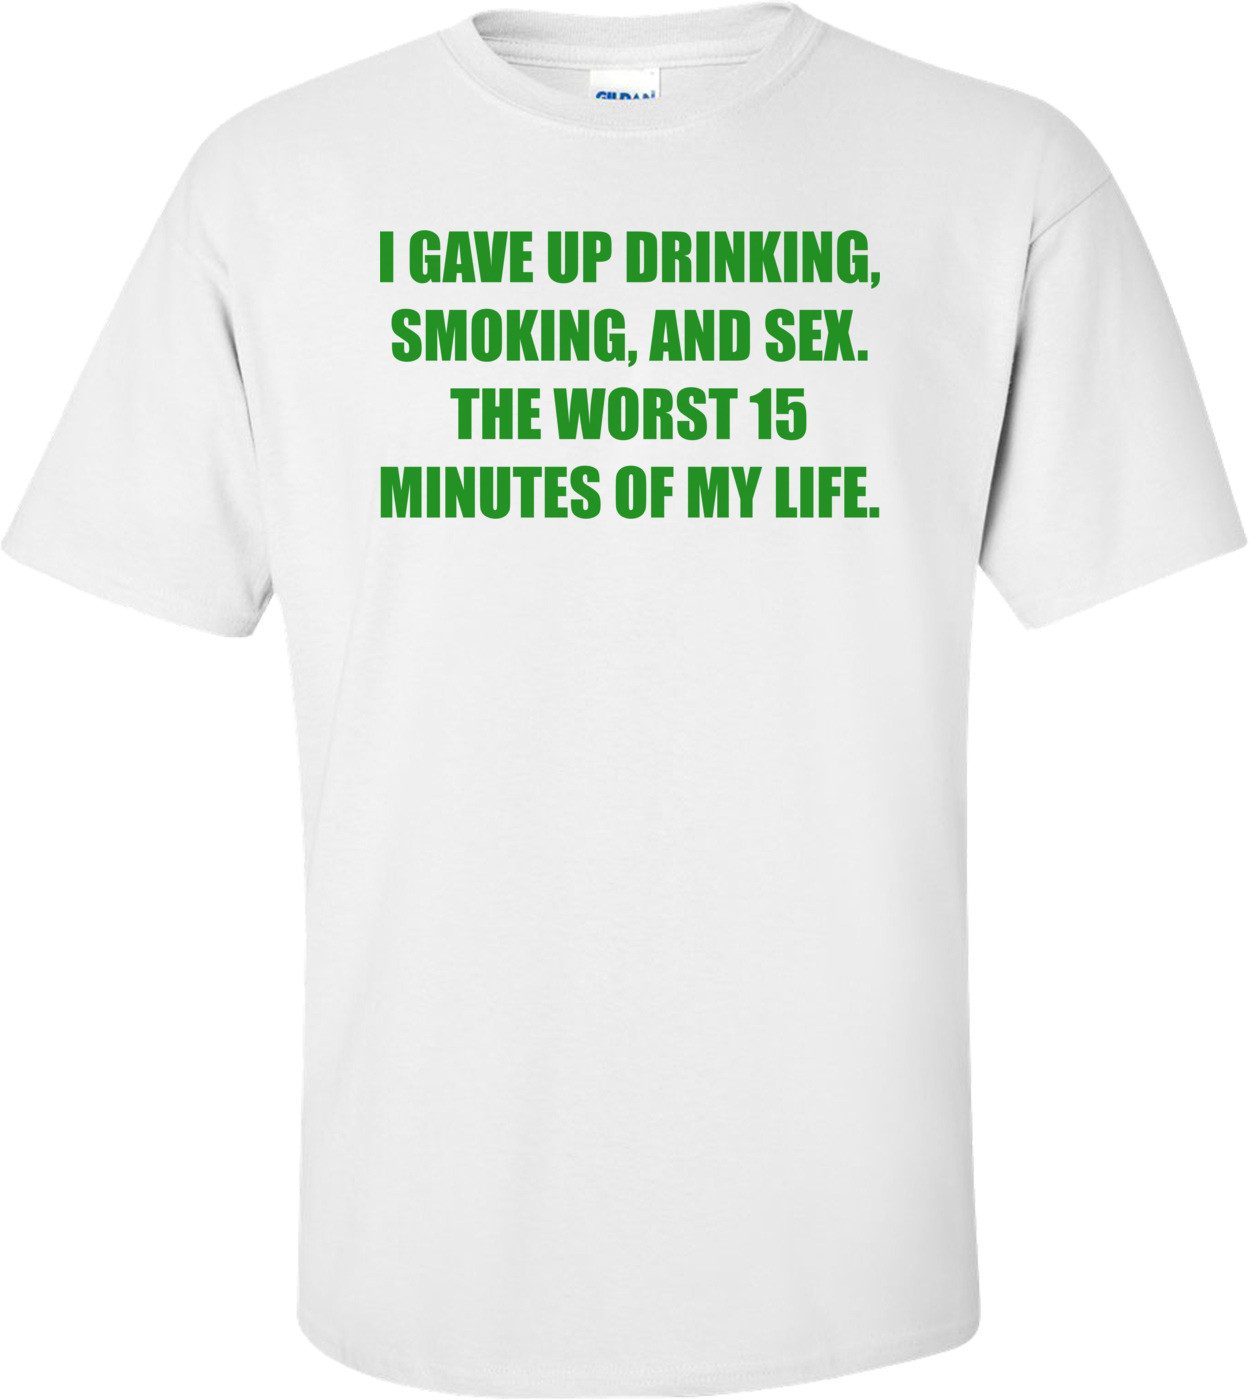 I GAVE UP DRINKING, SMOKING, AND SEX. THE WORST 15 MINUTES OF MY LIFE. Shirt